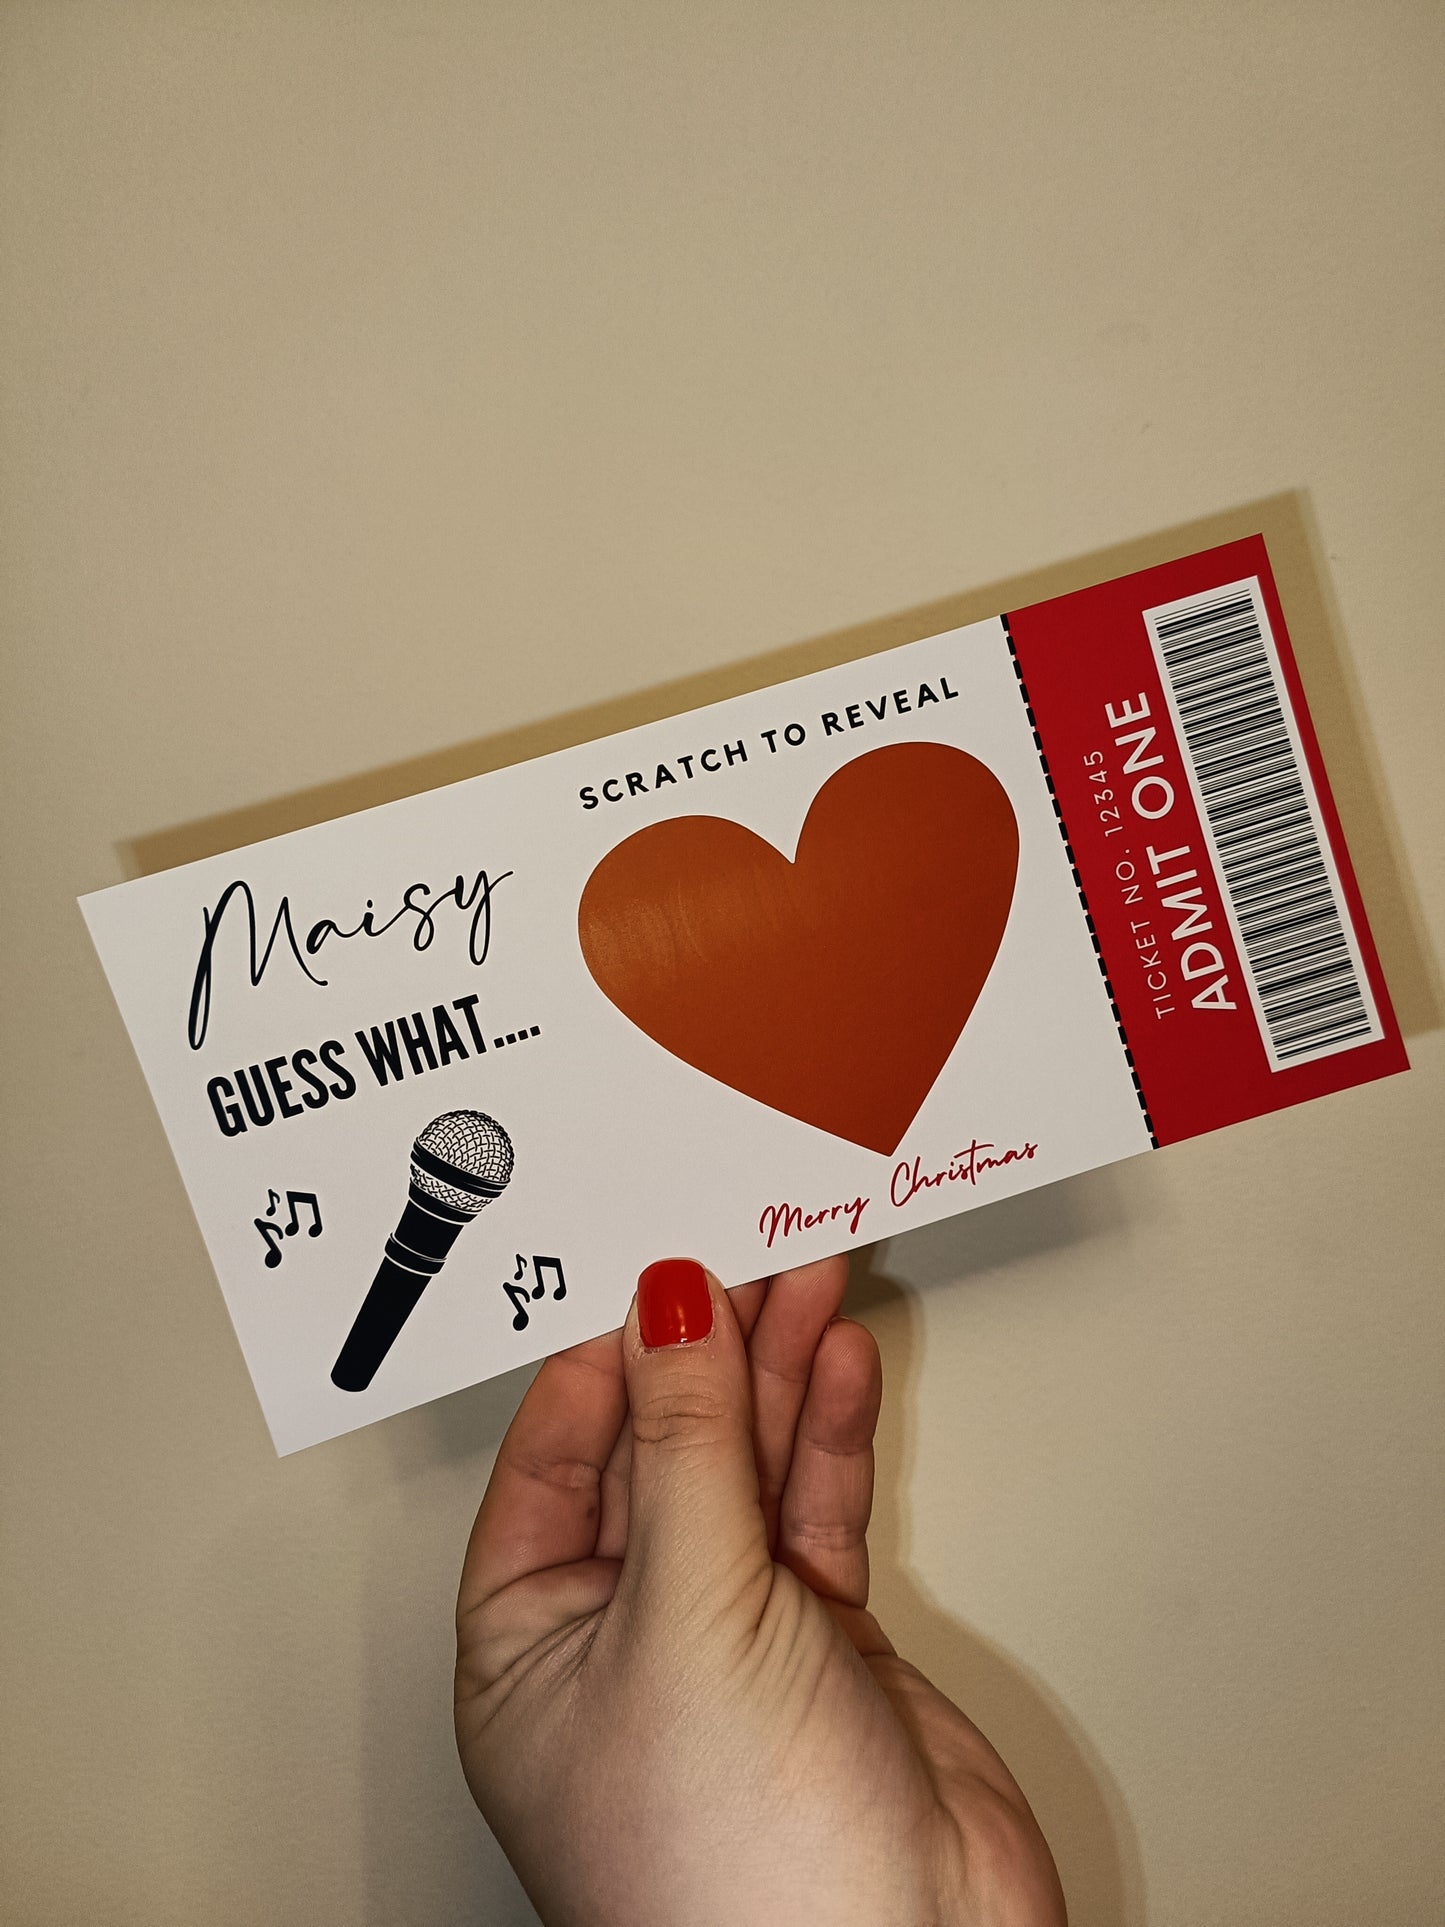 Surprise Ticket Print | Personalised Concert Scratch Reveal Ticket | Gift Idea